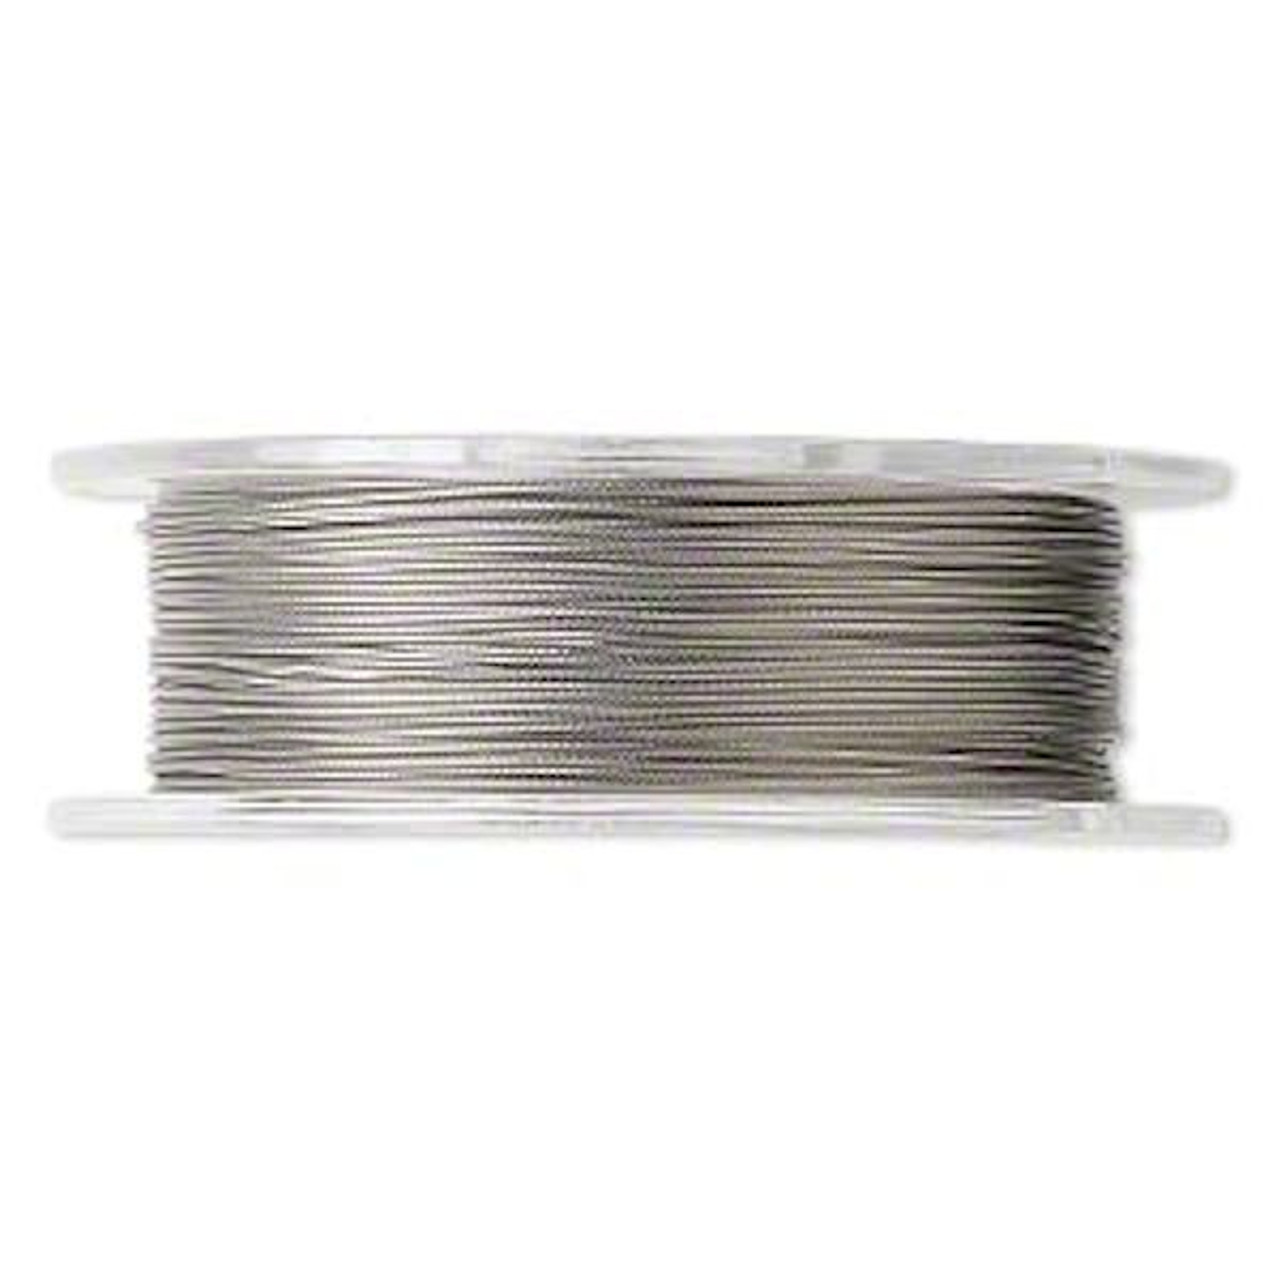 Beading Wire, 30 Foot Spool Clear 0.018 Diameter 7 Strand Tiger